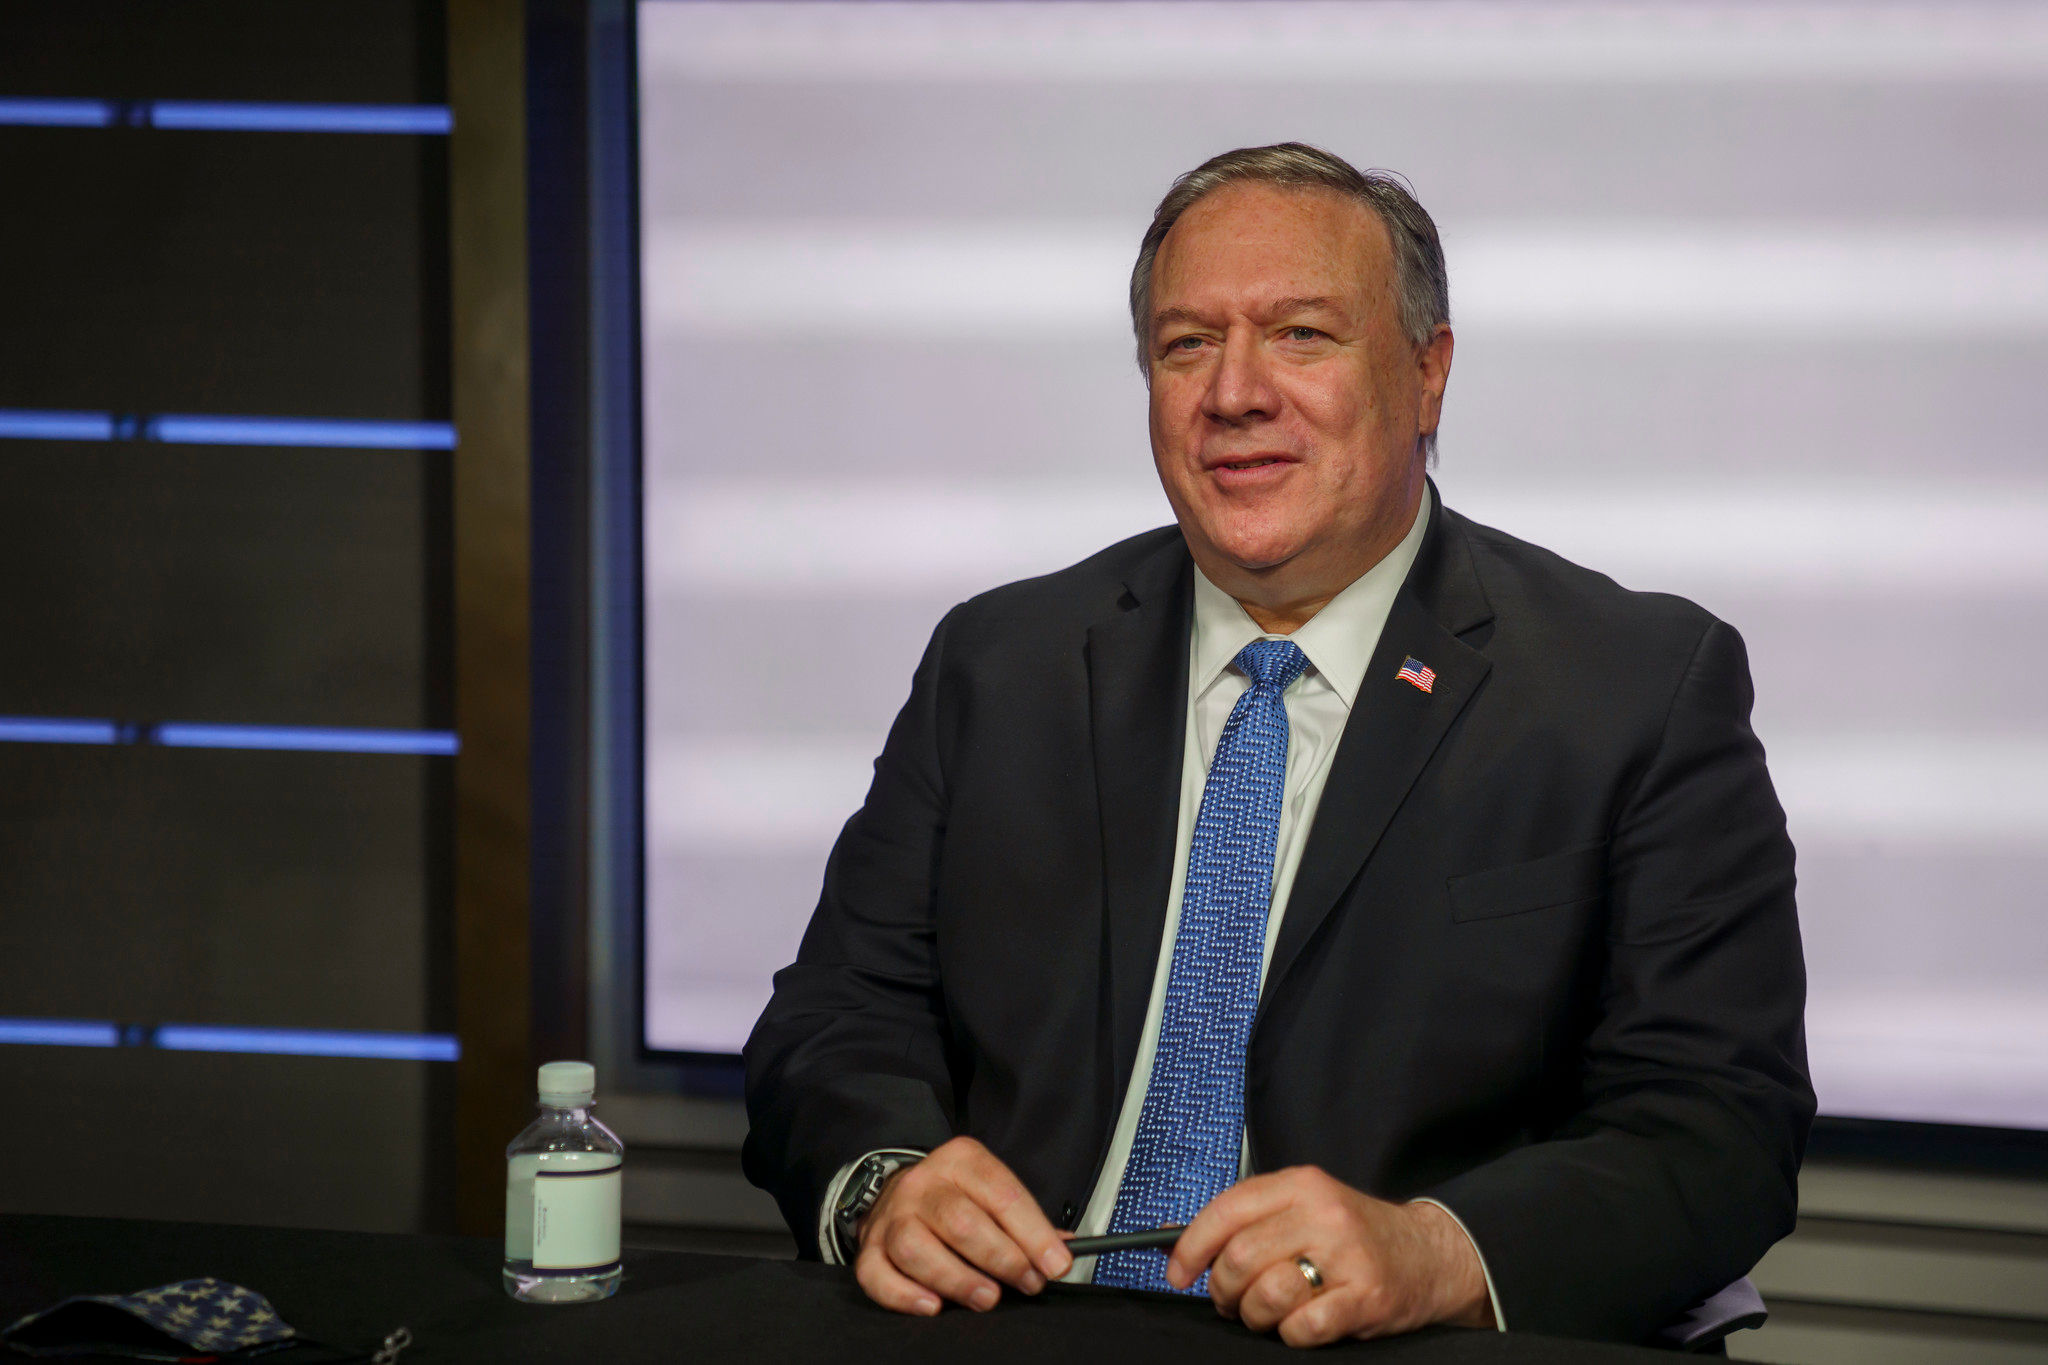 Mike Pompeo in quarantine after contact with COVID-positive person